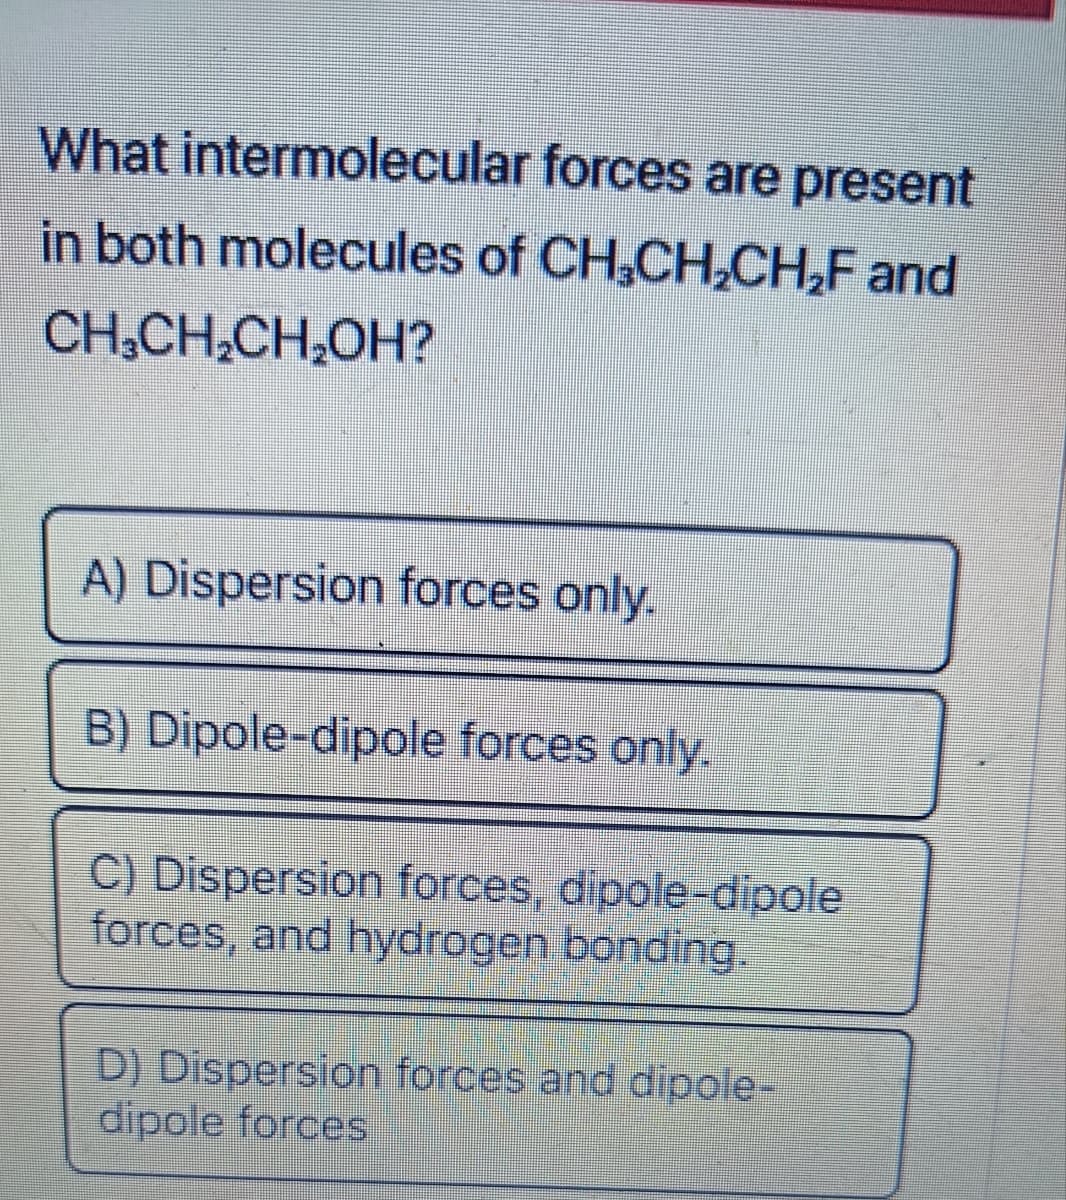 What intermolecular forces are present
in both molecules of CH₂CH₂CH₂F and
CH₂CH₂CH₂OH?
A) Dispersion forces only.
B) Dipole-dipole forces only.
C) Dispersion forces, dipole-dipole
forces, and hydrogen bonding.
D) Dispersion forces and dipole-
dipole forces